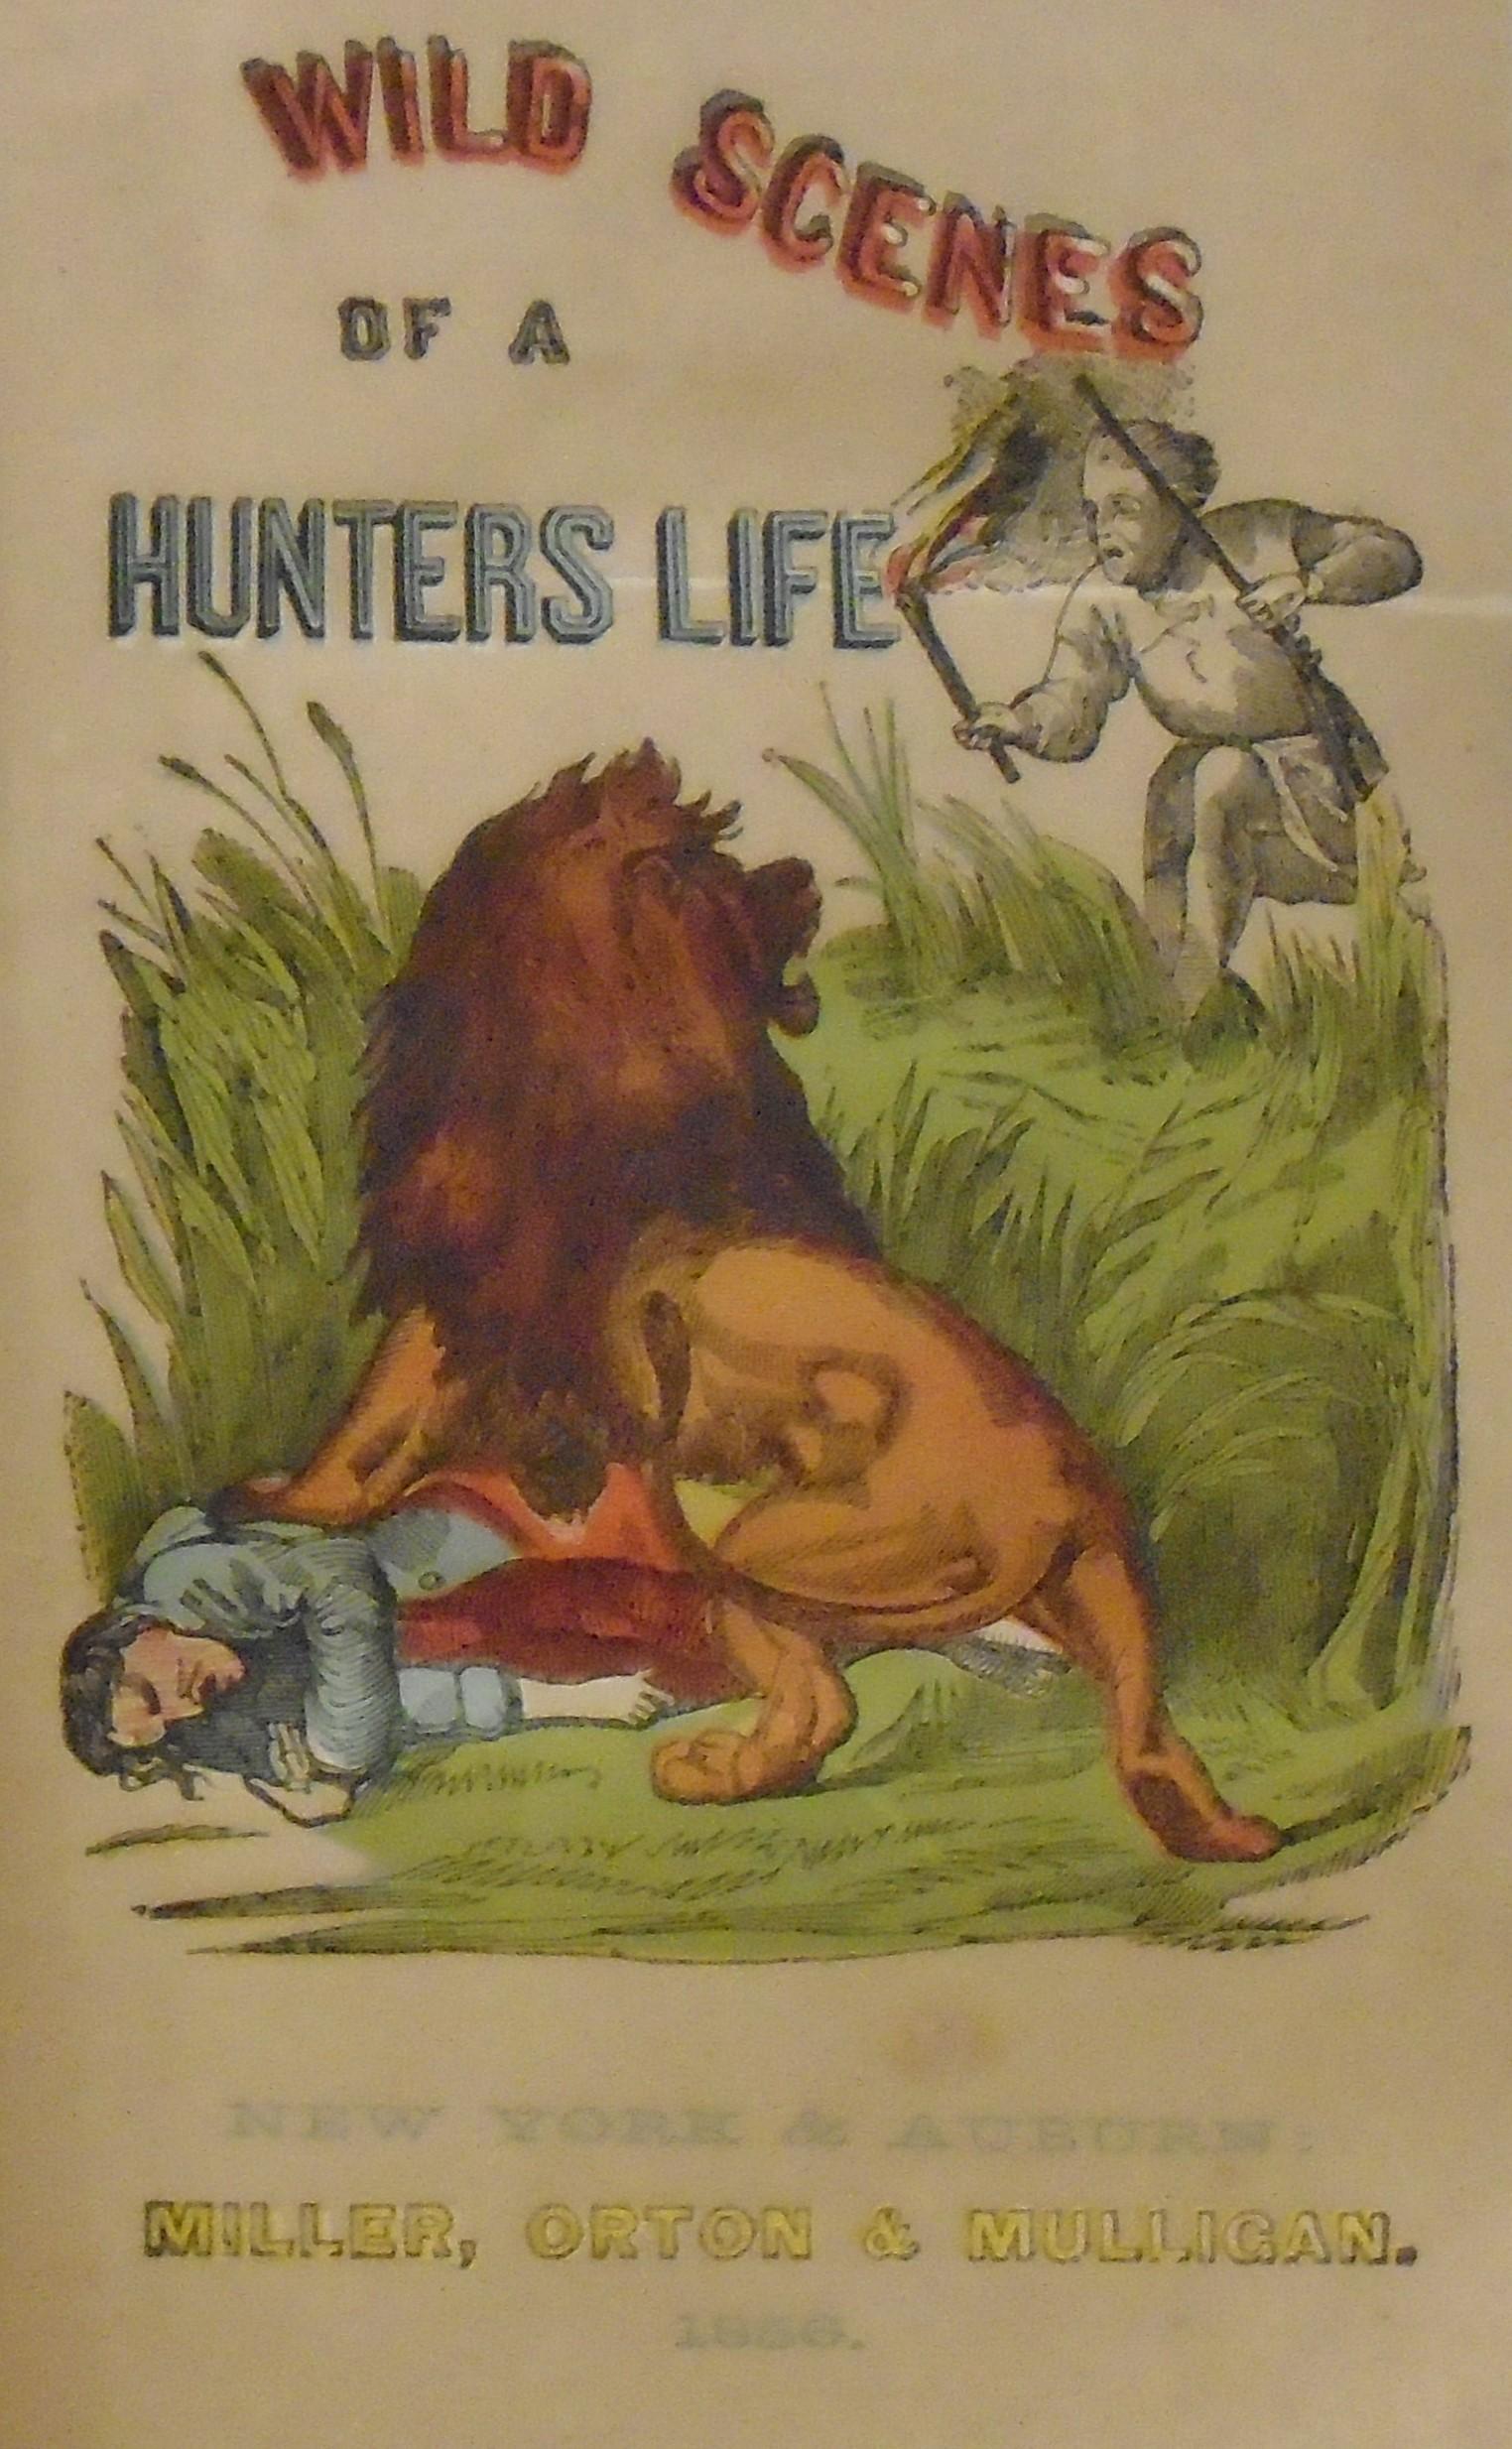 Wild Scenes of the (a) Hunter's Life; or The Hunting and Hunters of All ...